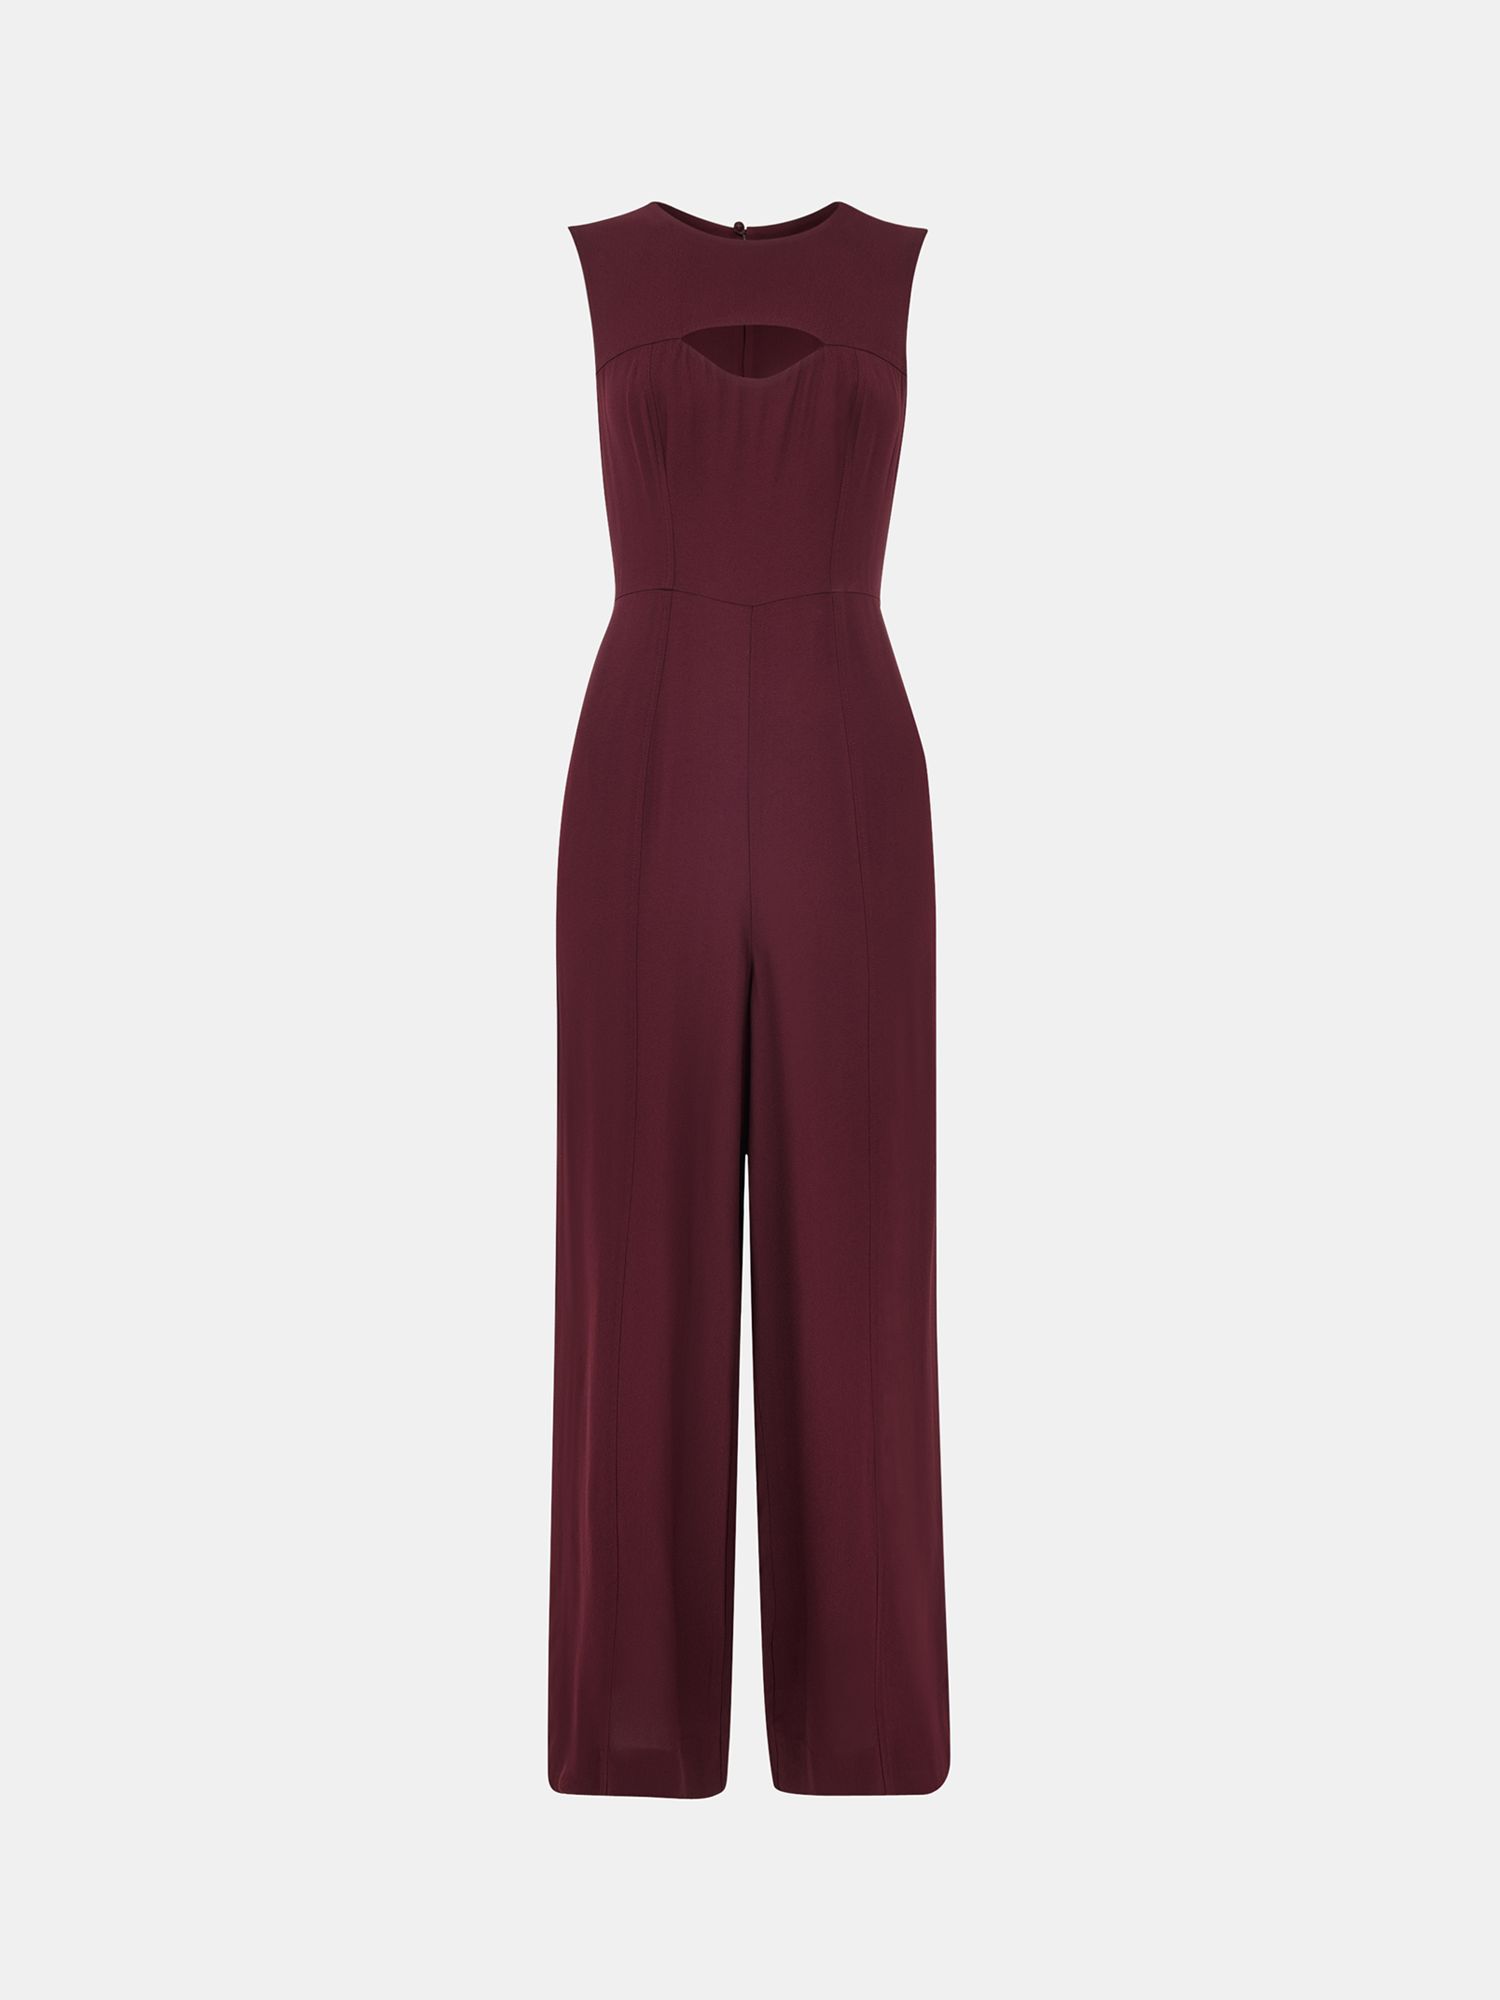 Whistles Harley Cut Out Jumpsuit, Burgundy at John Lewis & Partners